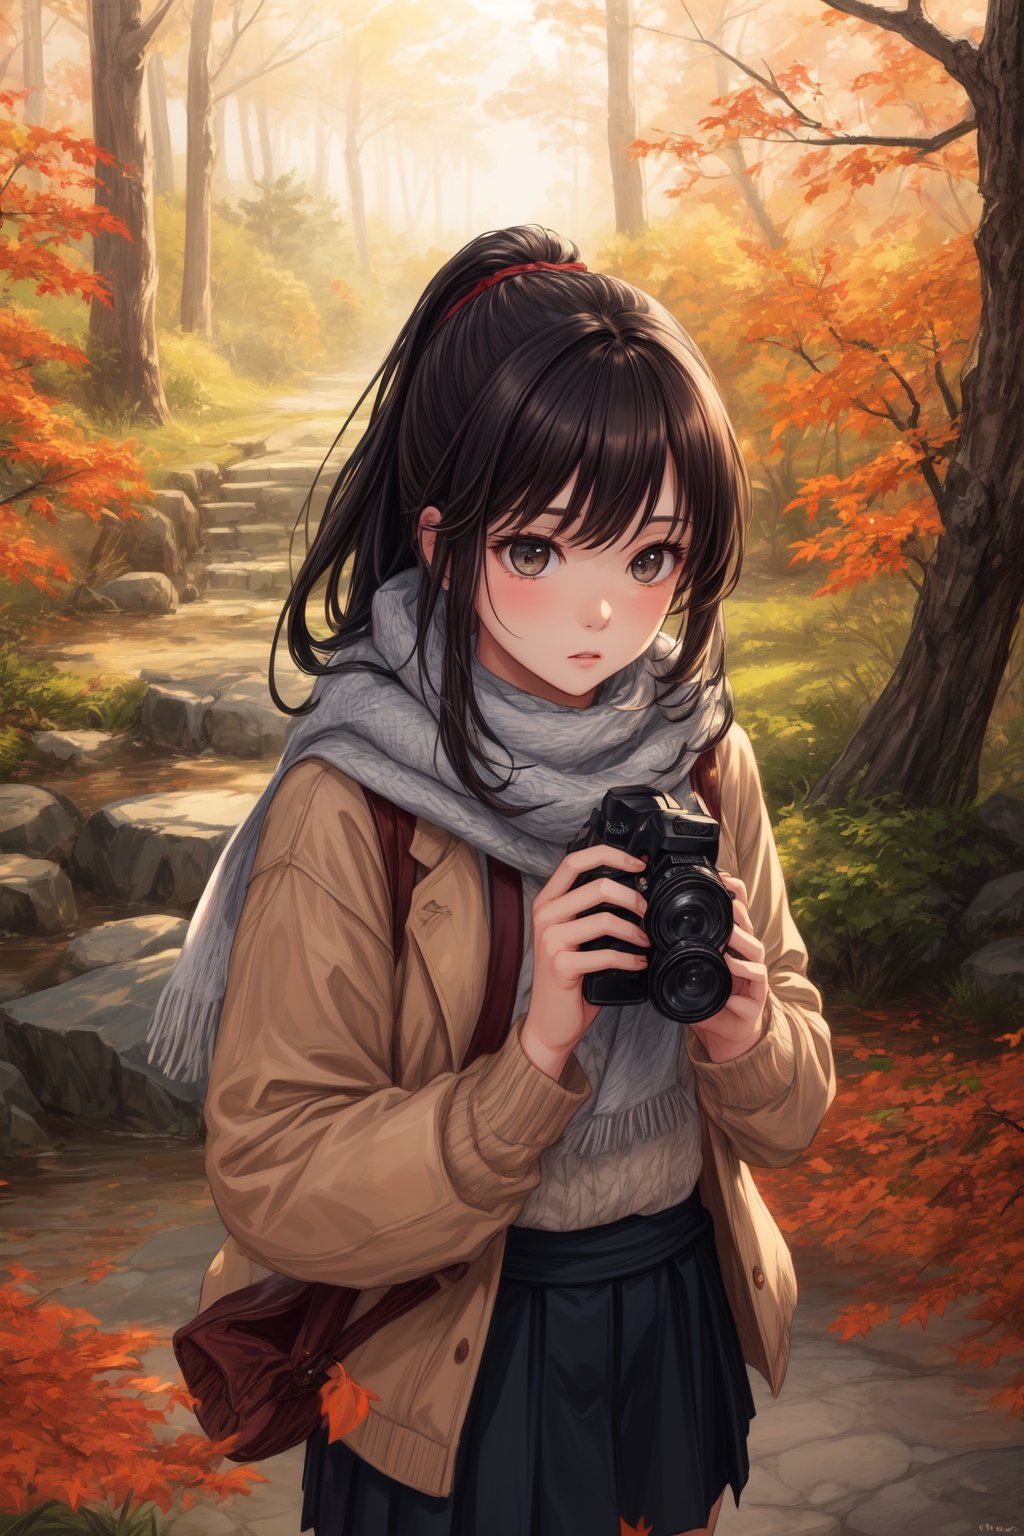 Realistic illustration of a high school girl with a ponytail, engrossed in 'momijigari' (autumn leaf viewing). She wears a warm sweater and a scarf, holding a camera in one hand. The scene is set in a serene Japanese forest, with trees displaying vibrant red and orange autumn leaves. The ground is covered with fallen leaves, and the atmosphere gives a gentle hint of the approaching winter.